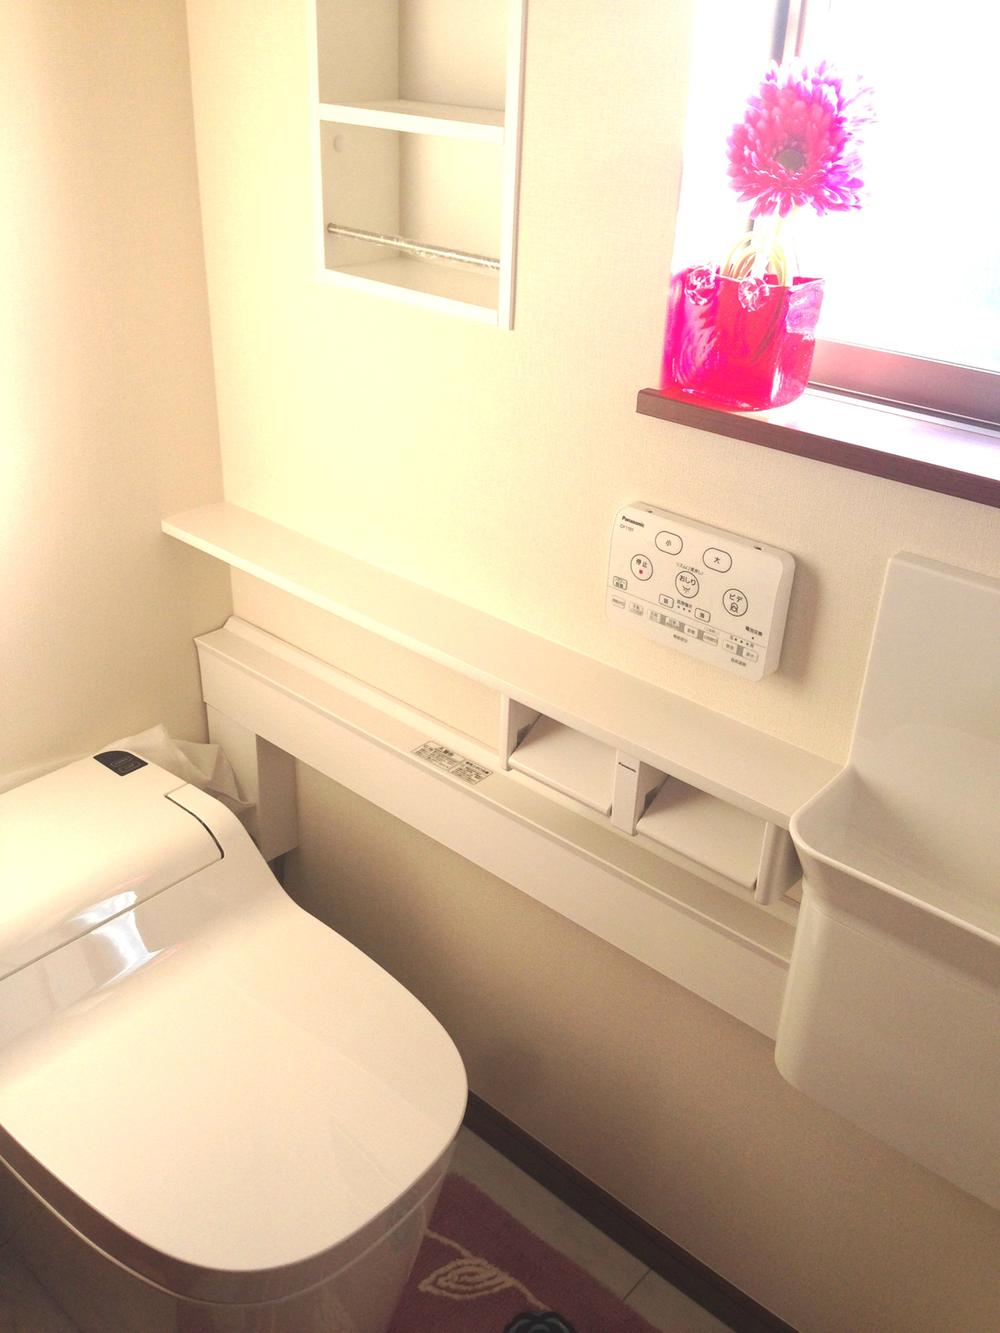 Toilet. Tankless type with a hand washing counter.